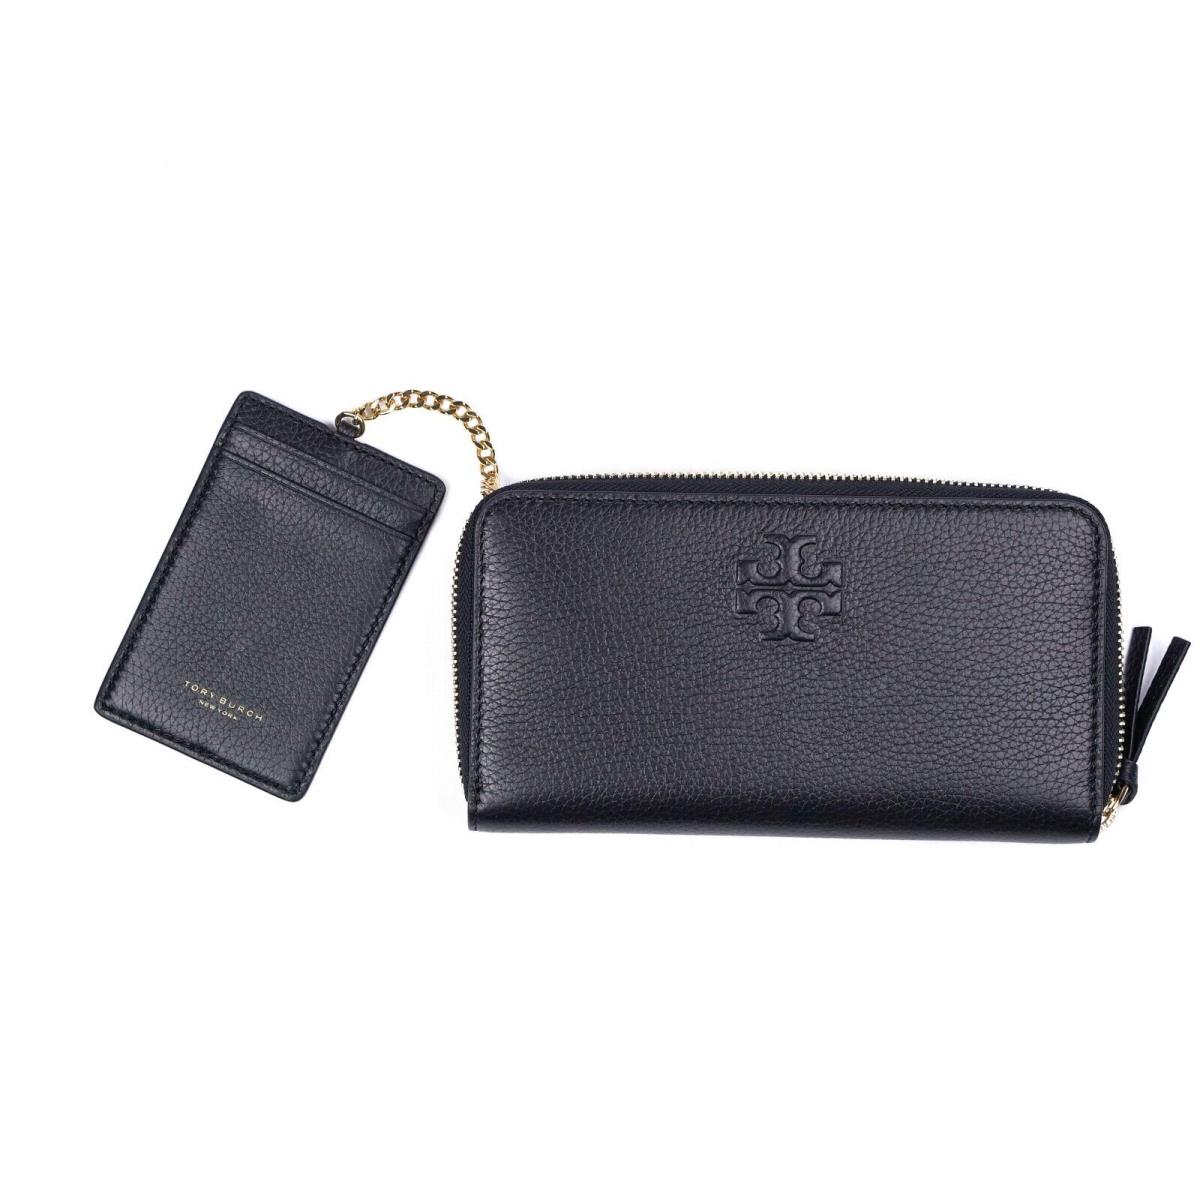 Tory Burch Thea Black Pebbled Leather Continental Wallet with Card Case  86004 - Tory Burch wallet - 080031542823 | Fash Brands